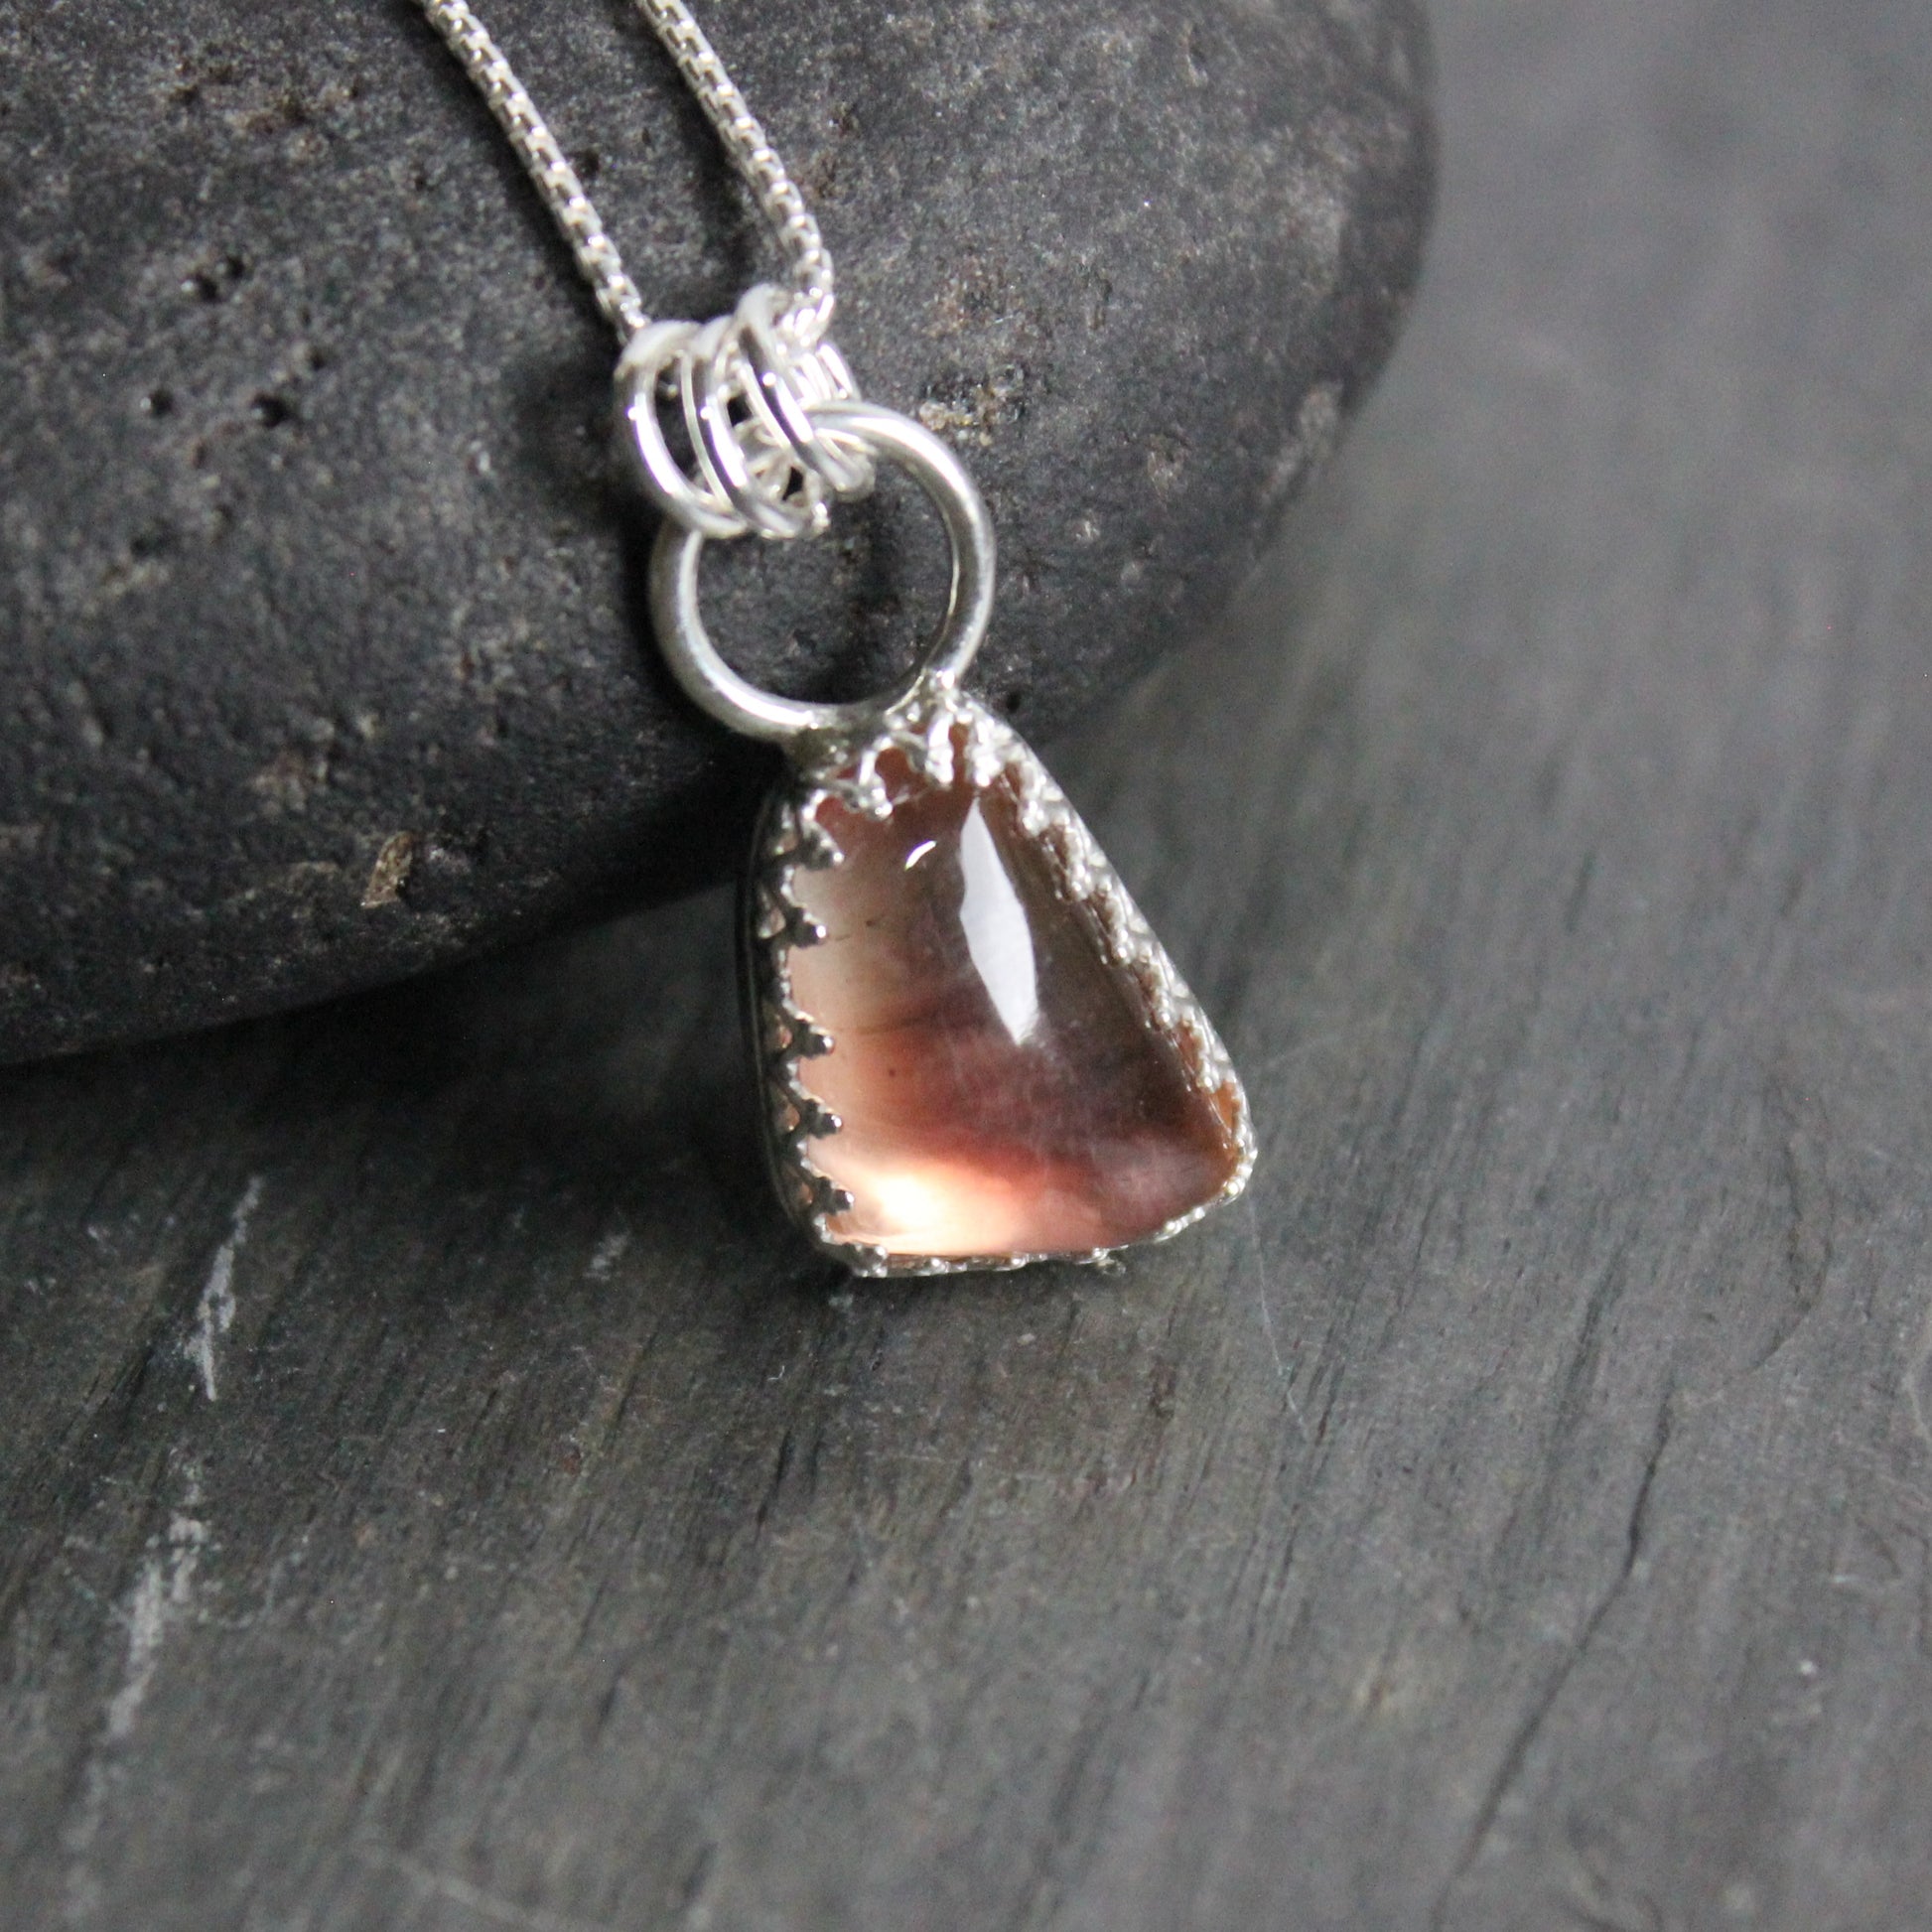 This is an approximately 12mm x 18mm Oregon sunstone with red and shiller throughout.  It has a fancy sterling silver bezel setting. 